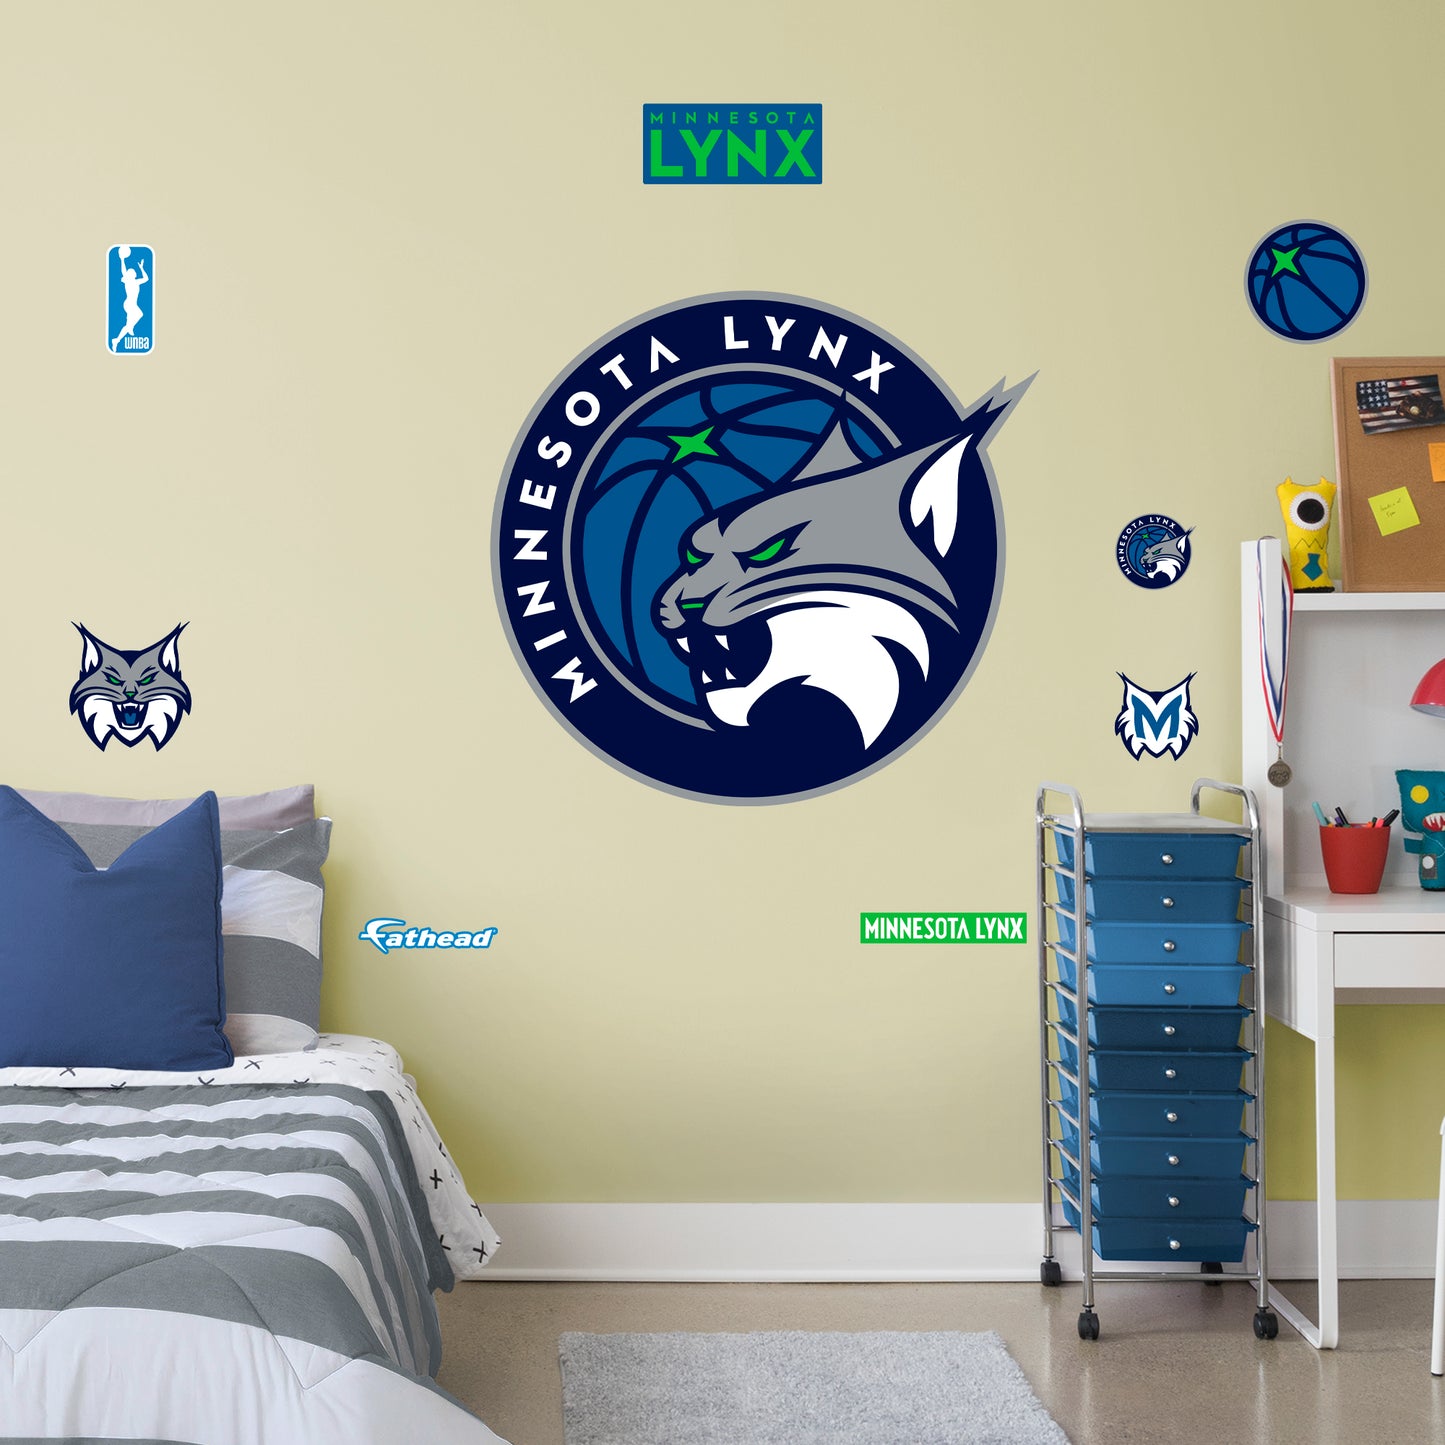 Minnesota Lynx: Logo - Officially Licensed WNBA Removable Wall Decal